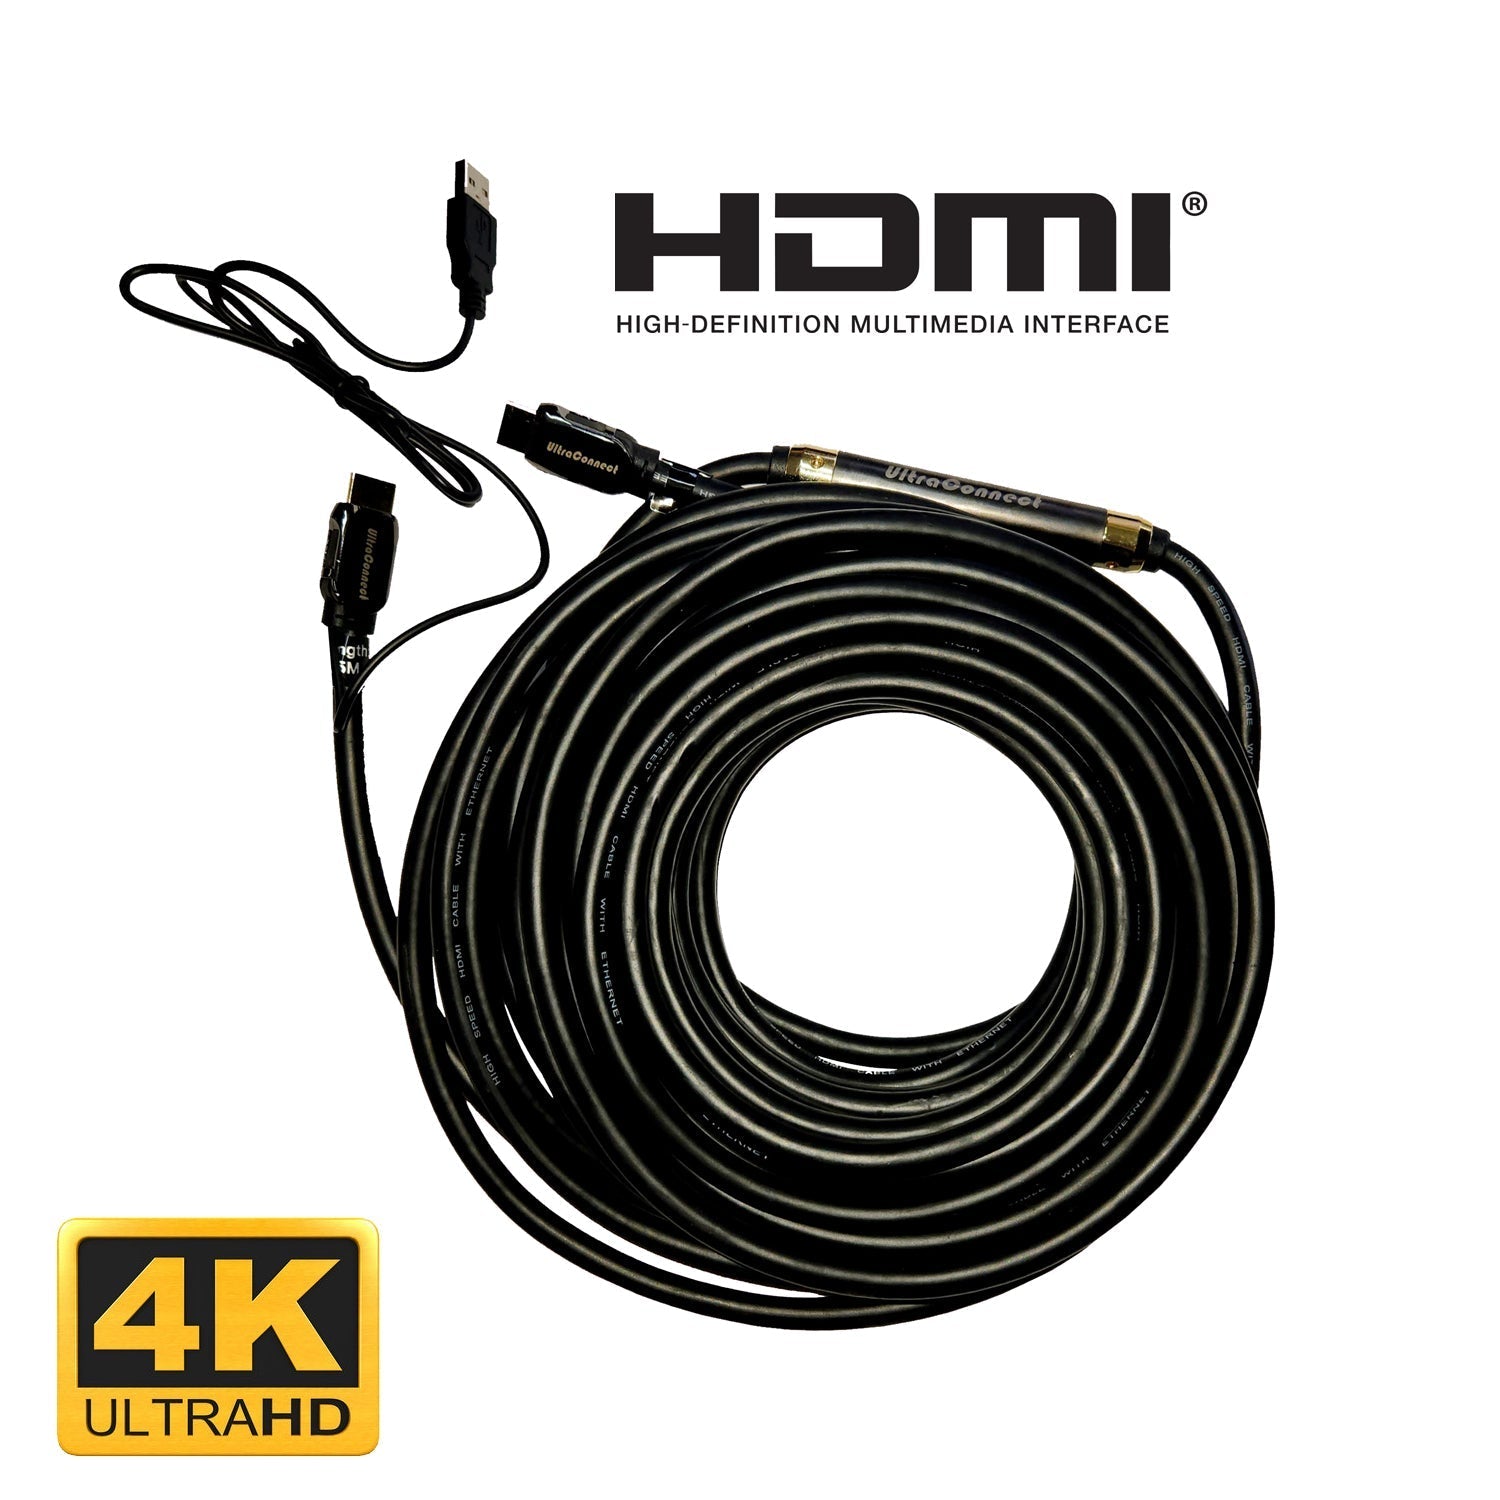 15m HDMI 4K UHD Audio Video Cable (with USB Powered Signal Amplifier) - Karaoke Home Entertainment